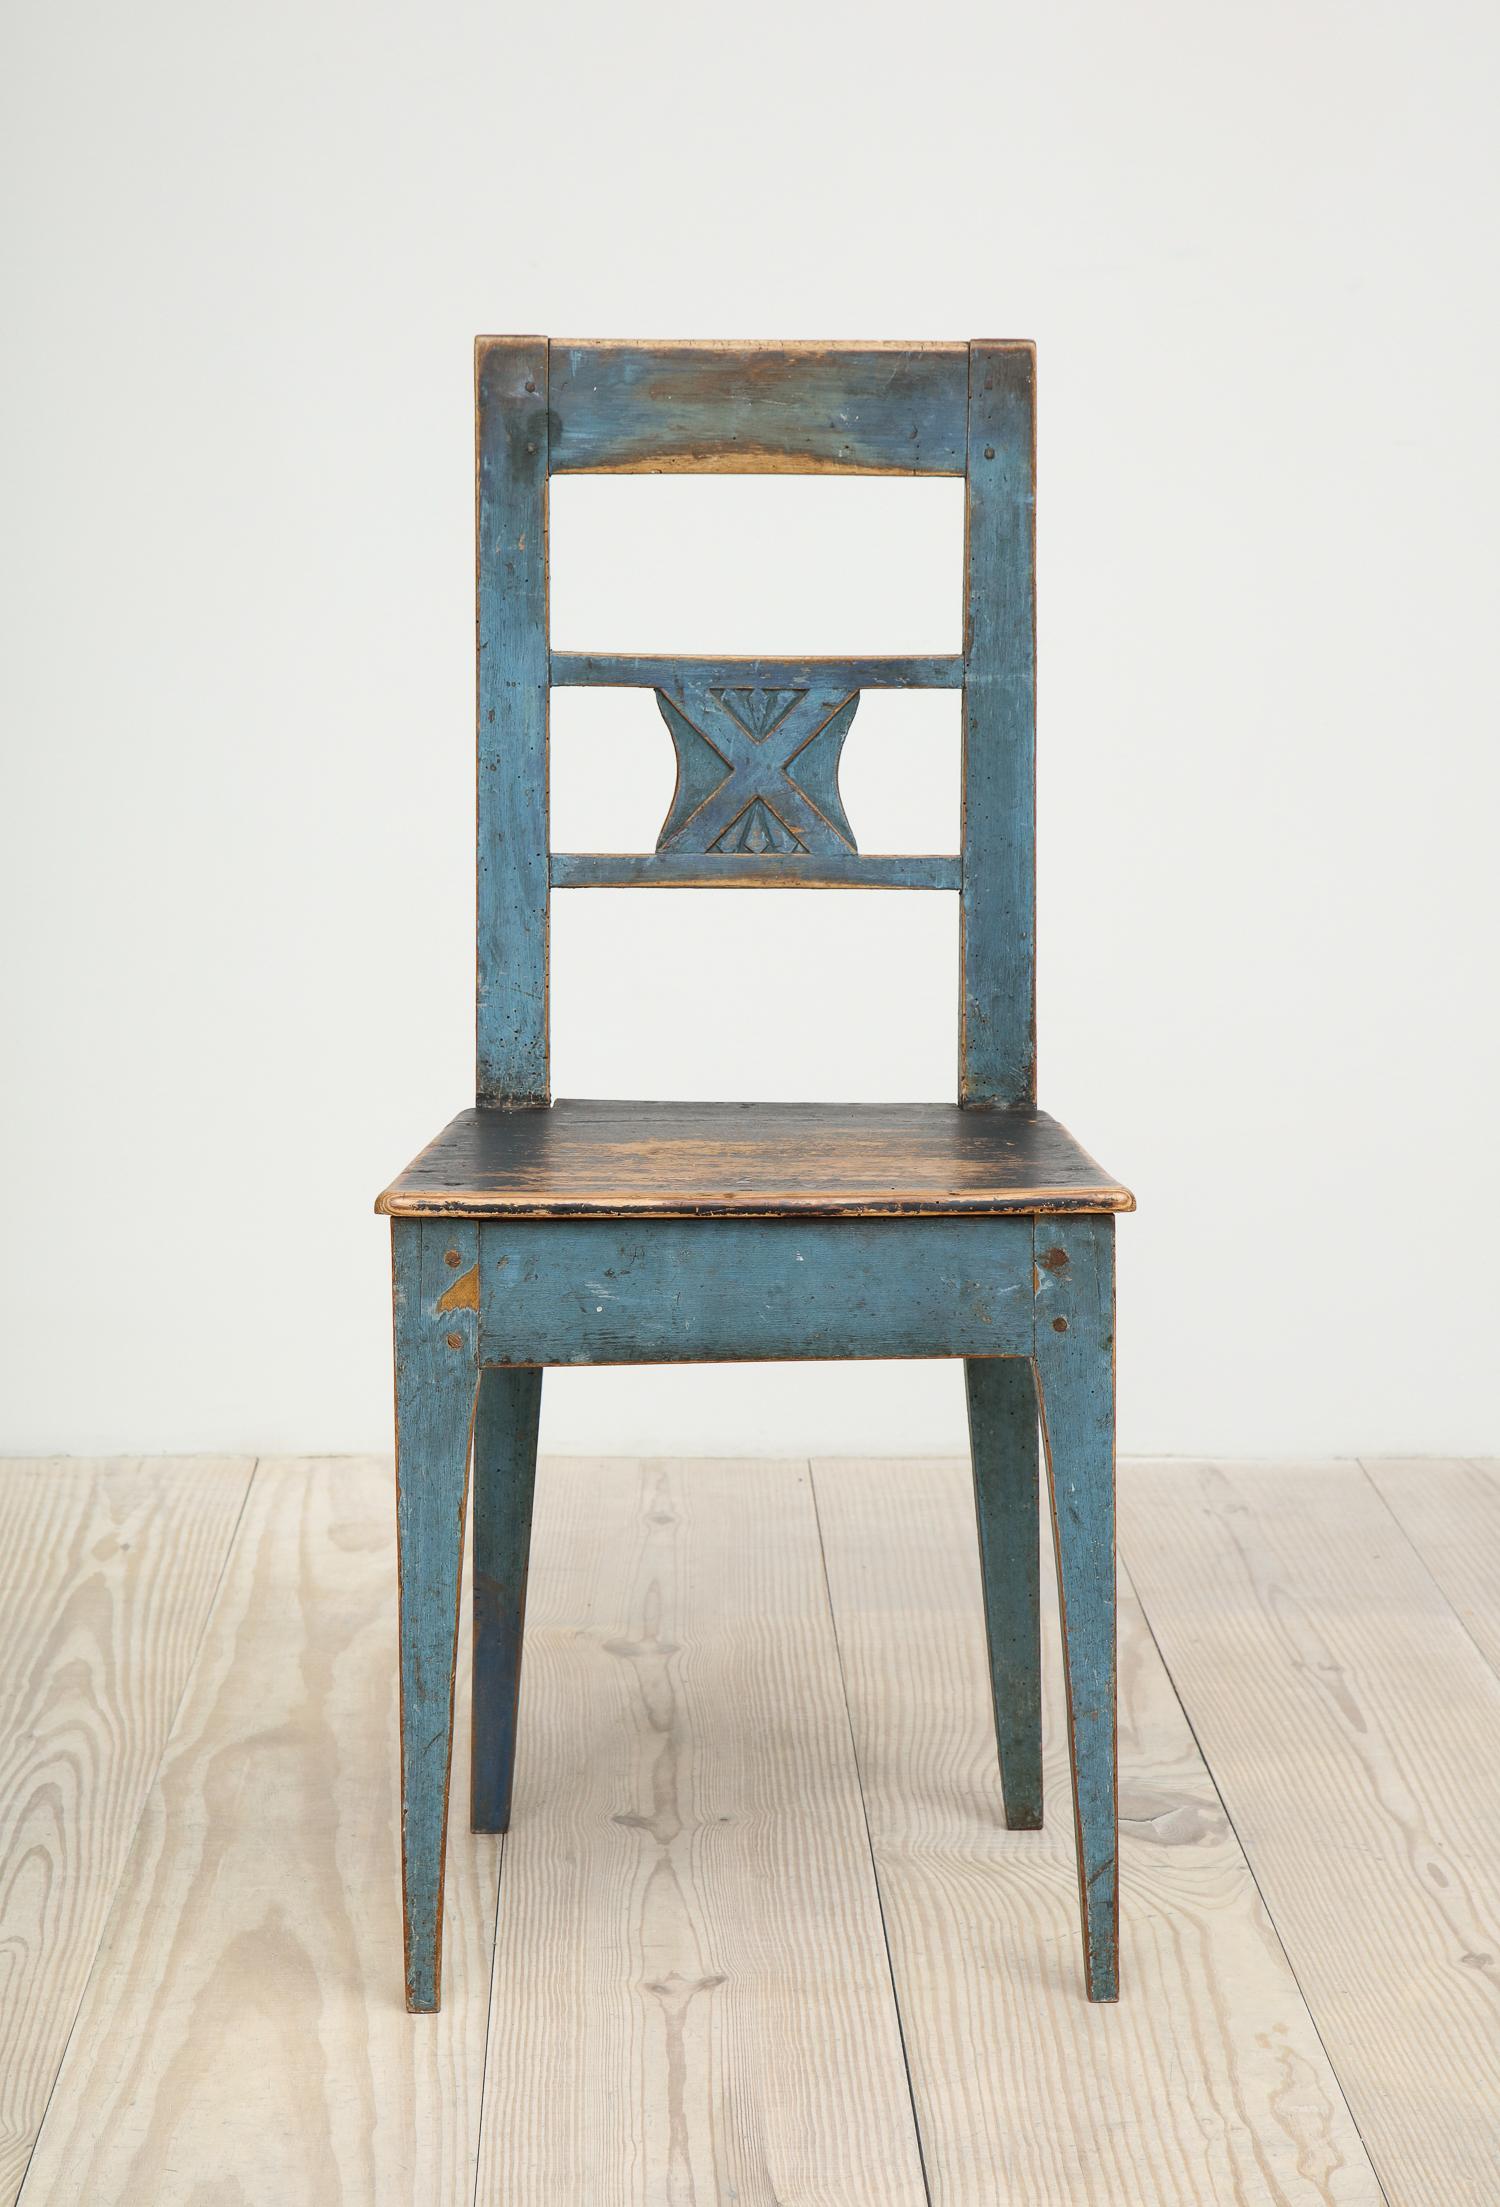 Swedish Allmoge chair, origin: Sweden, circa 1800, charming hand-carvings with original blue and black paint

Allmoge is the Swedish word referring to furniture and objects belonging to and made by country or rural folk. Today such pieces are